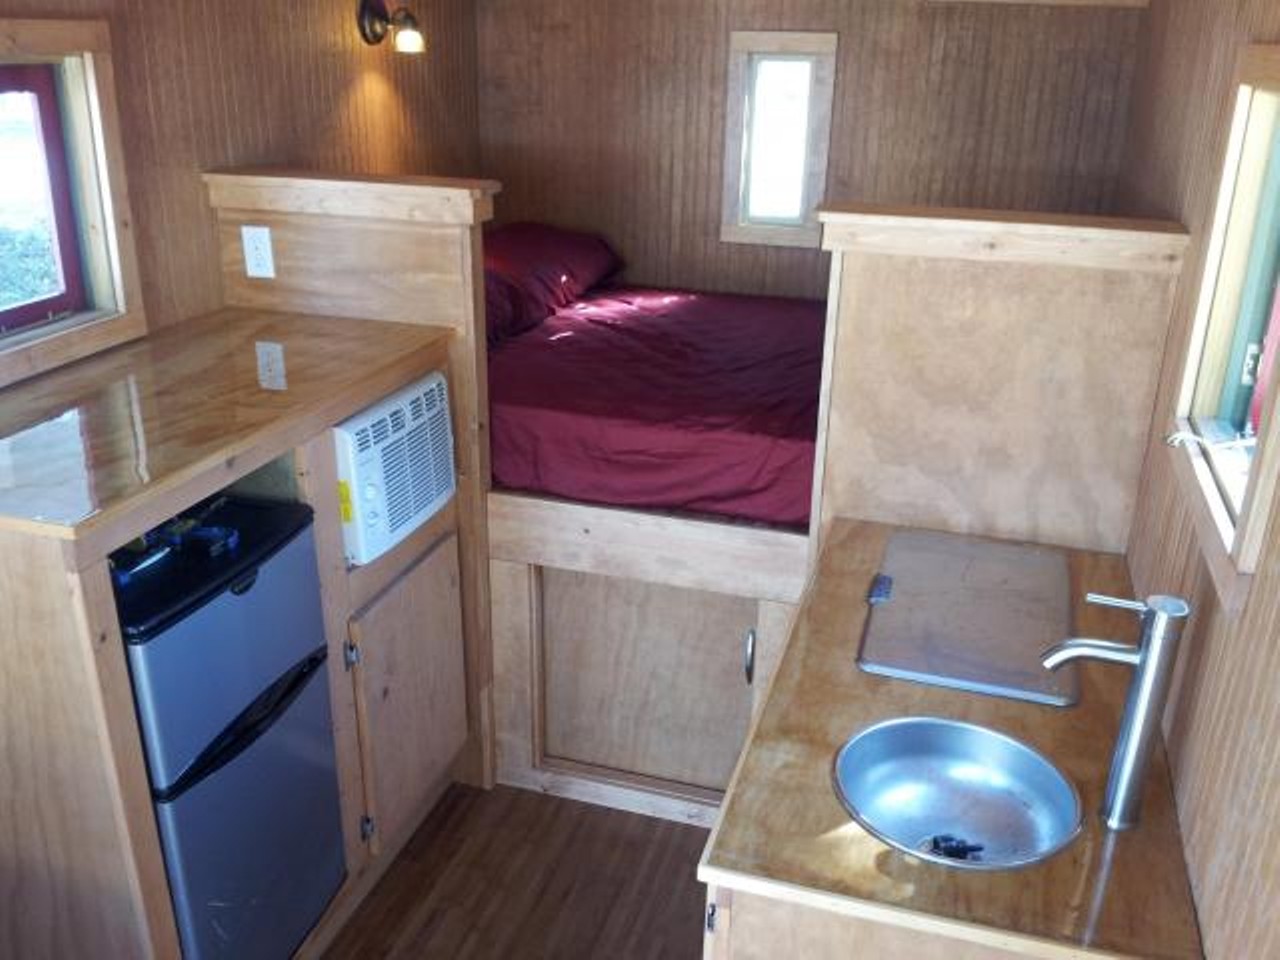 Gypsy Wagon Camper
Location: Clearwater
Price: $9250
Size: 90 sq ft 
You know you're going to have to fit all your belongings under that bed.